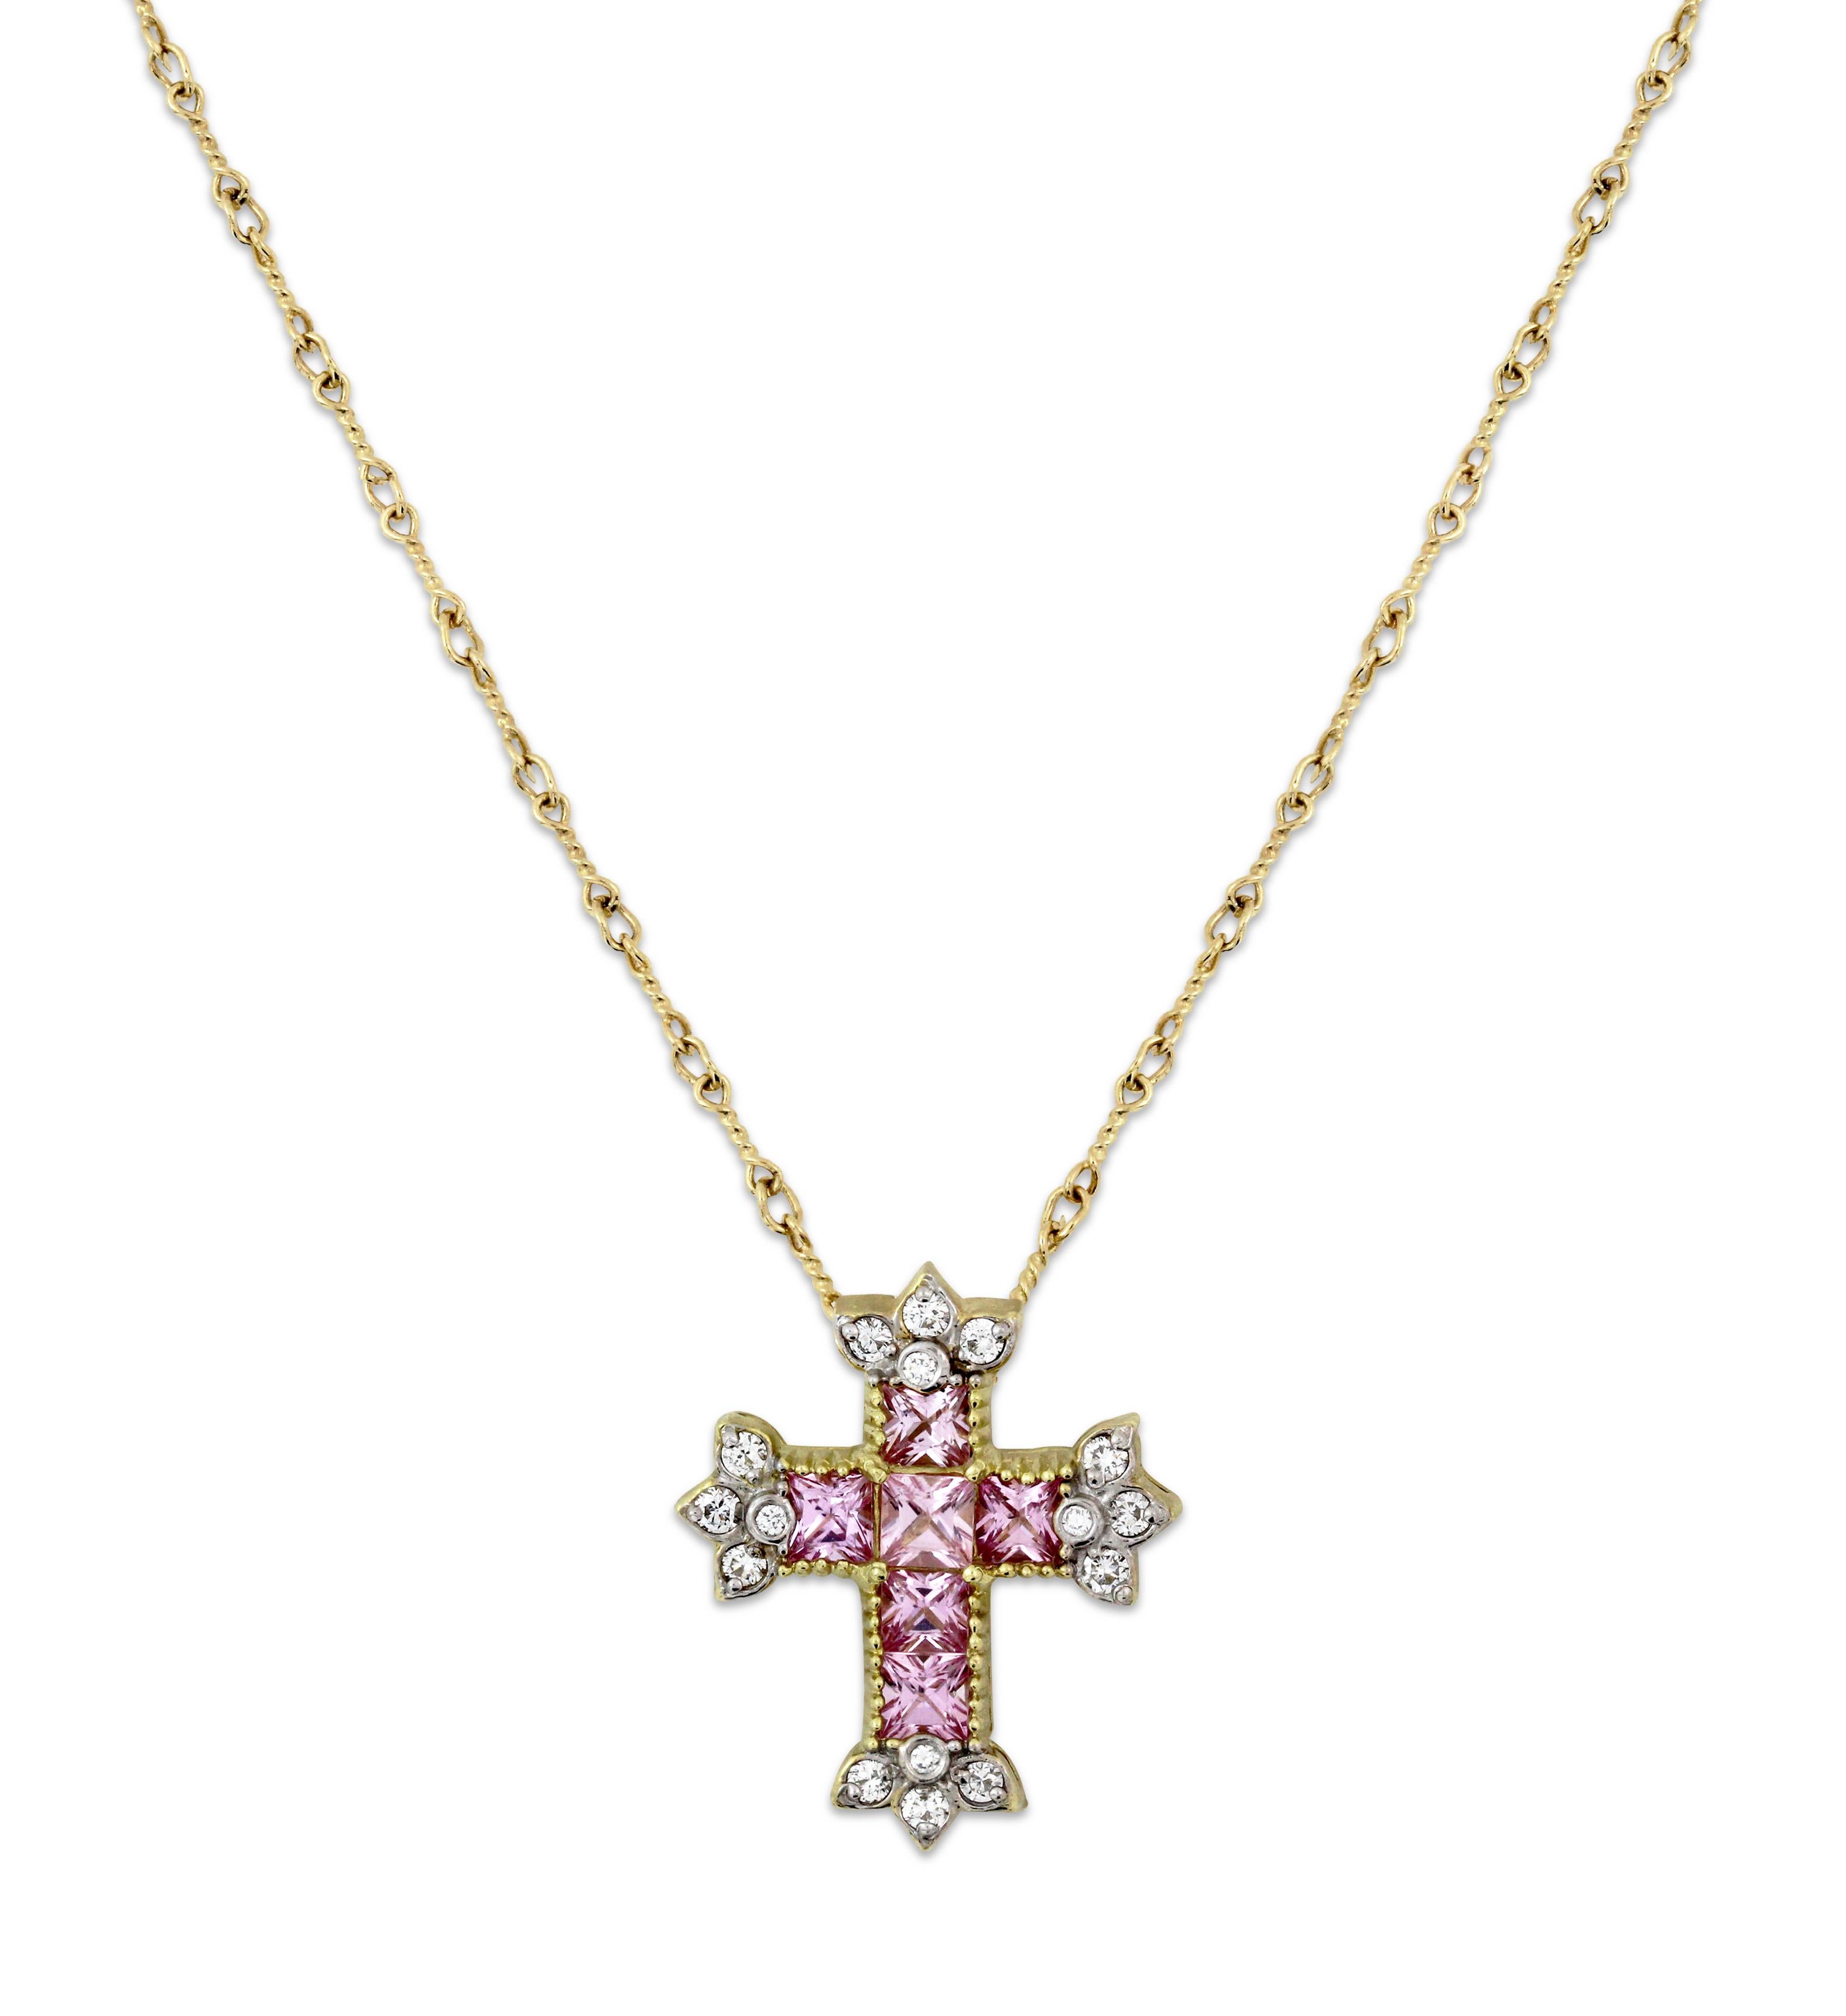 IF YOU ARE REALLY INTERESTED, CONTACT US WITH ANY REASONABLE OFFER. WE WILL TRY OUR BEST TO MAKE YOU HAPPY!

18K Yellow Gold and Diamond Cross Pendant with Pink Sapphires and Diamonds by Stambolian

Six Princess-cut Pink Sapphires and Diamonds make